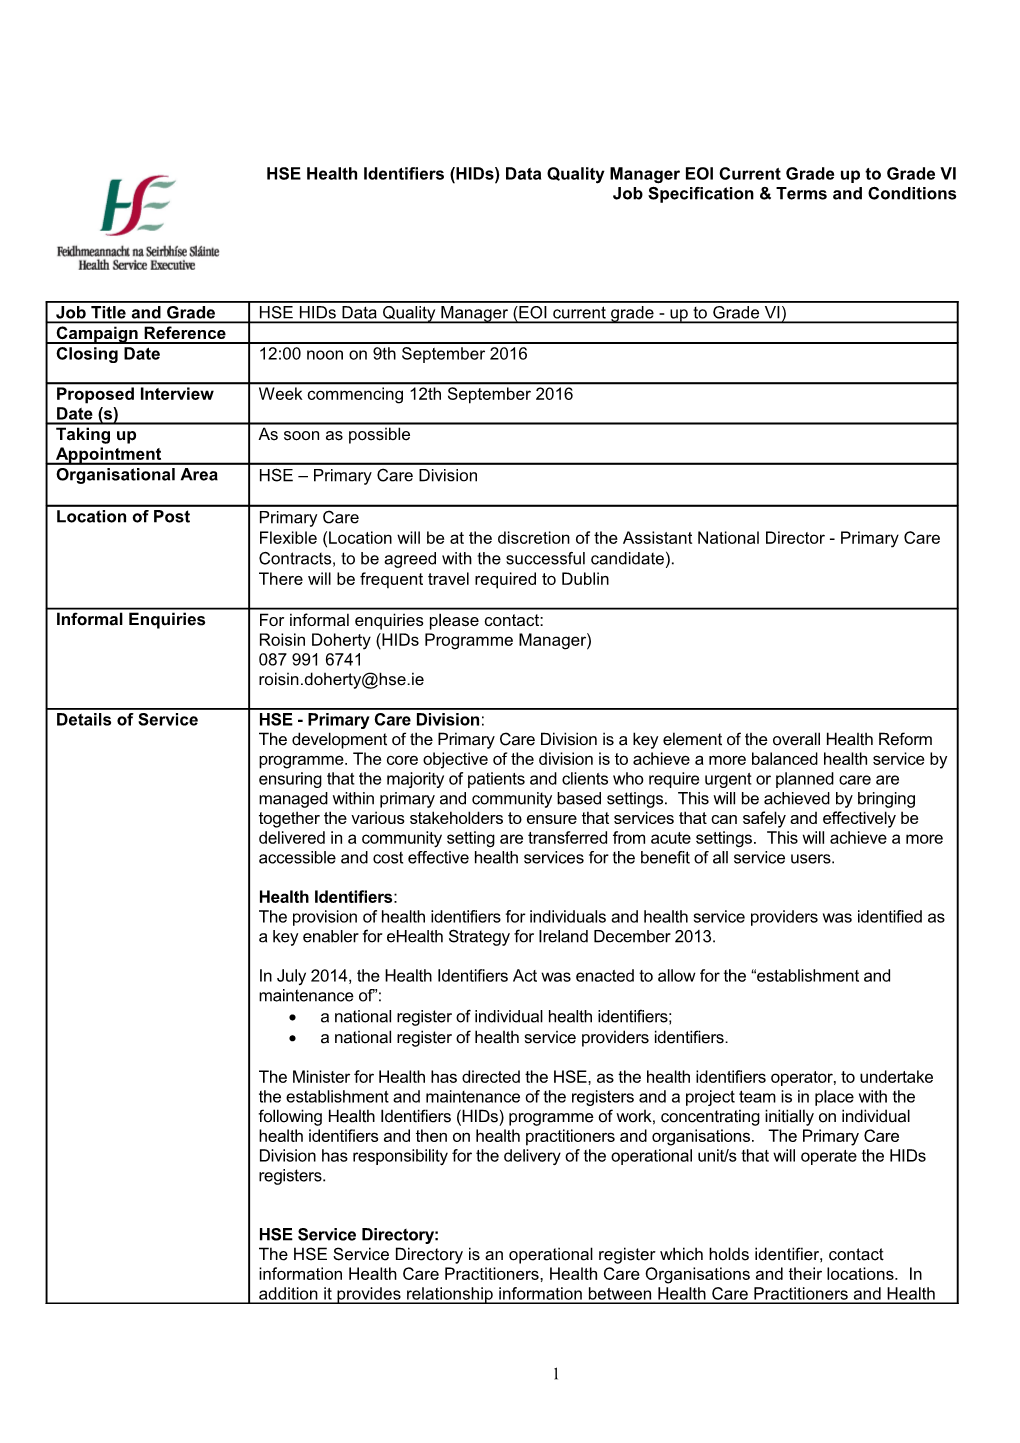 Job Specification & Terms and Conditions s6